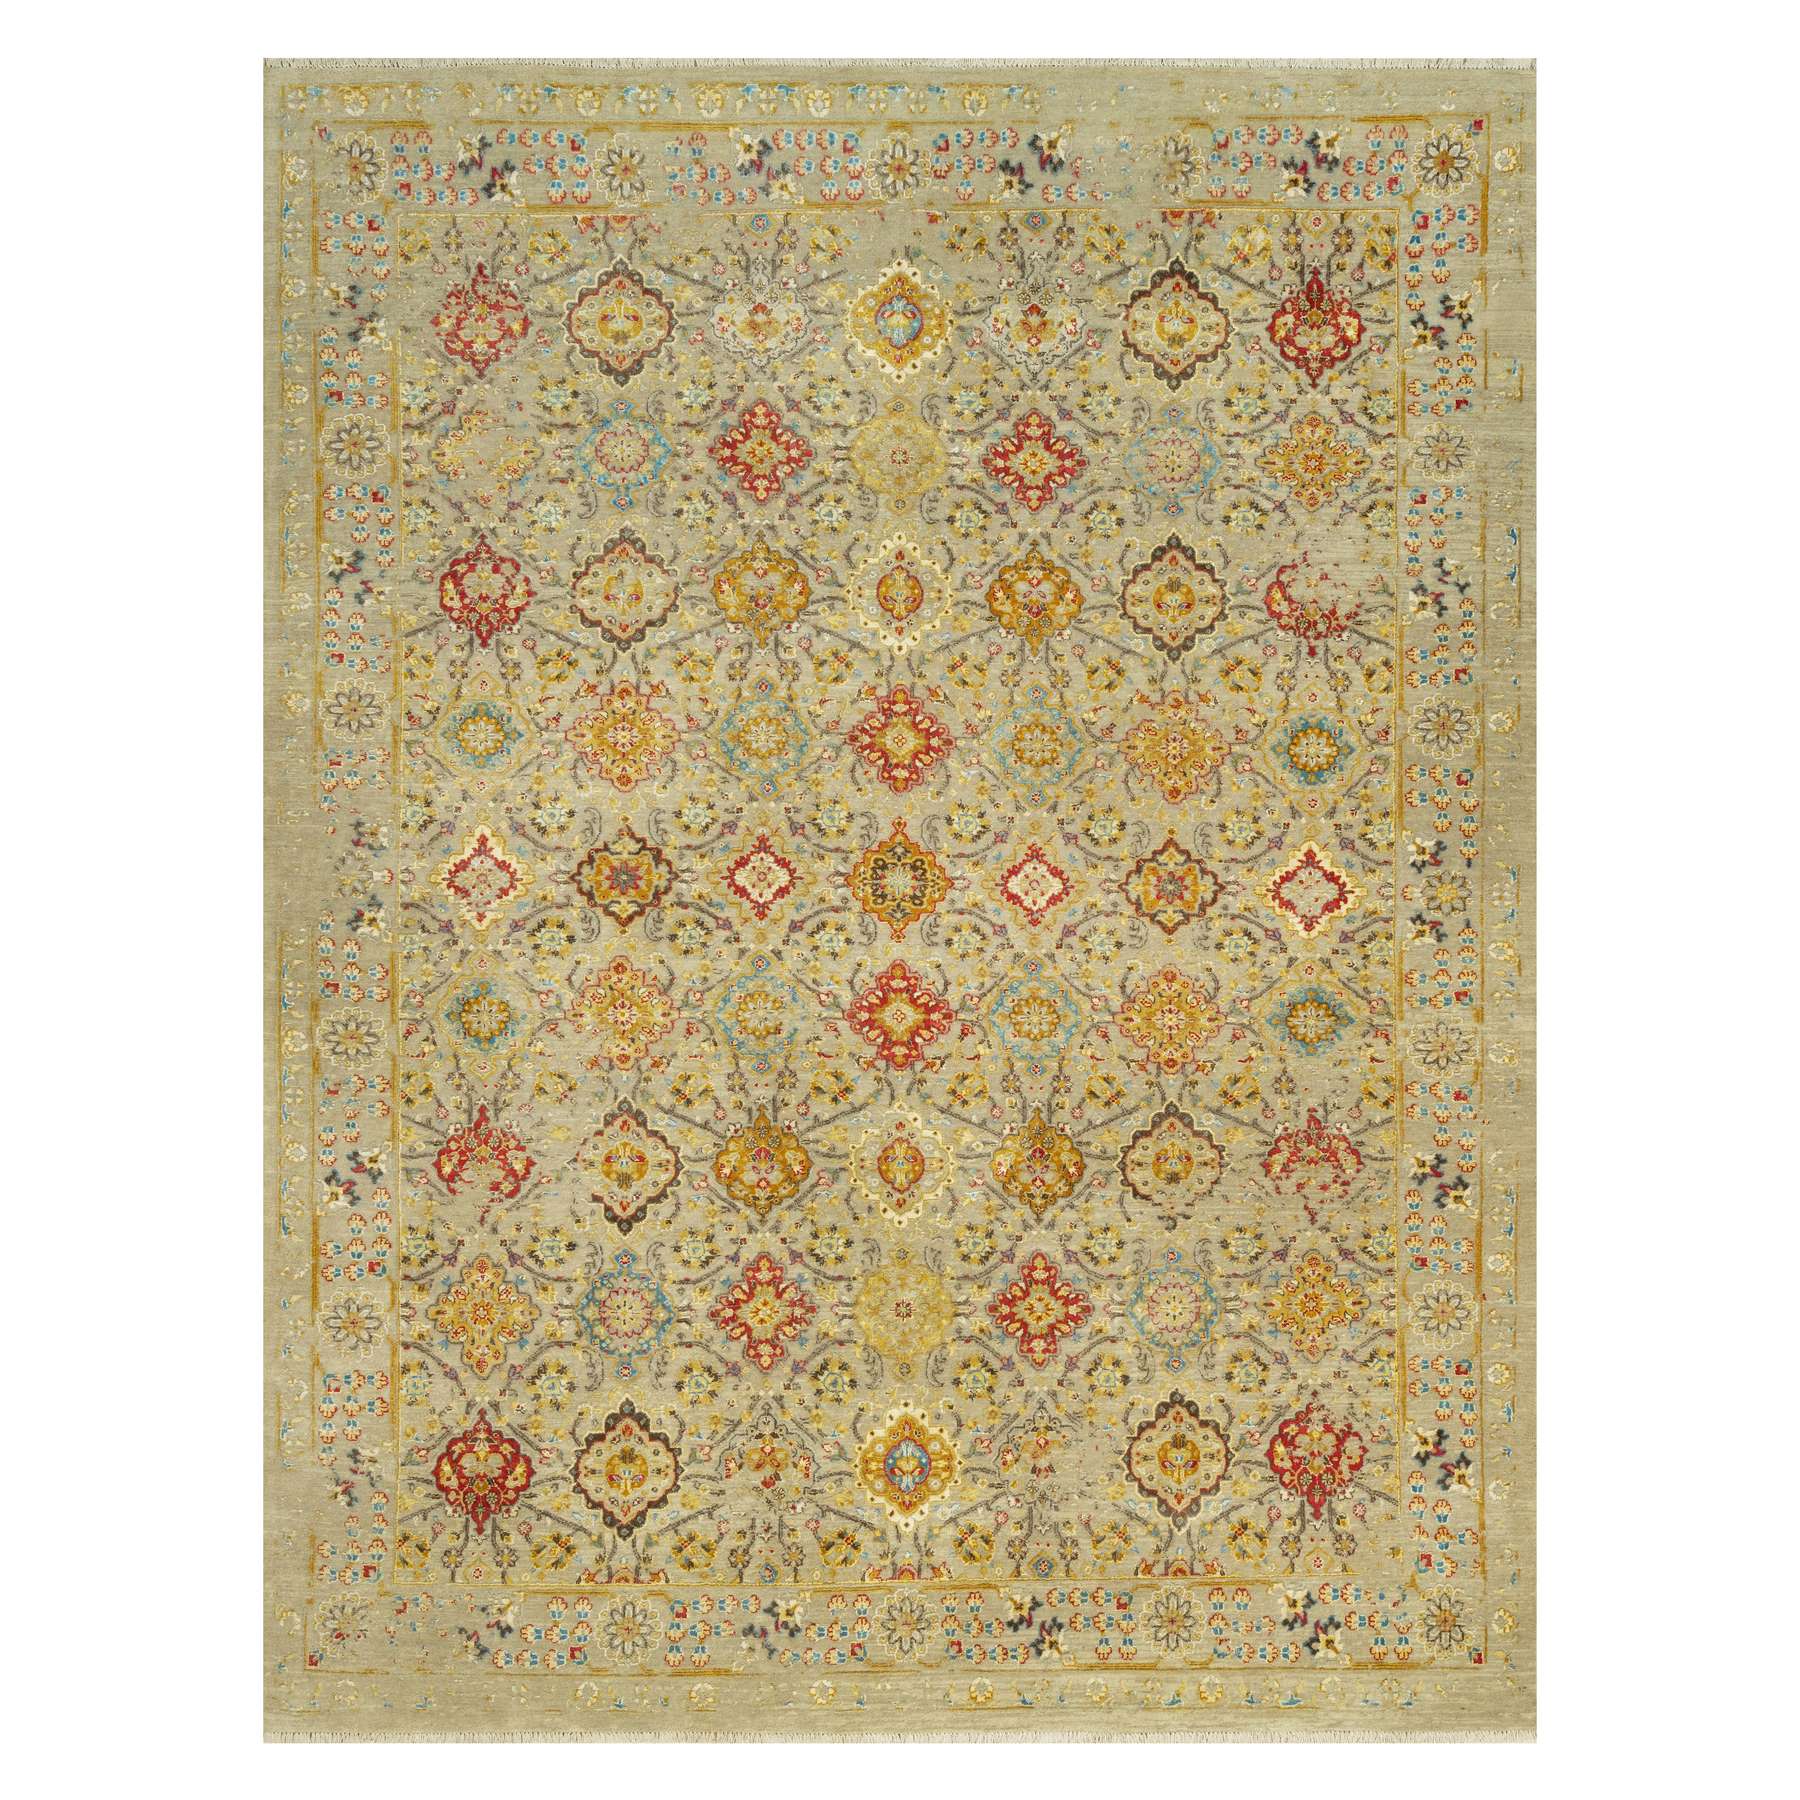  Silk Hand-Knotted Area Rug 9'1